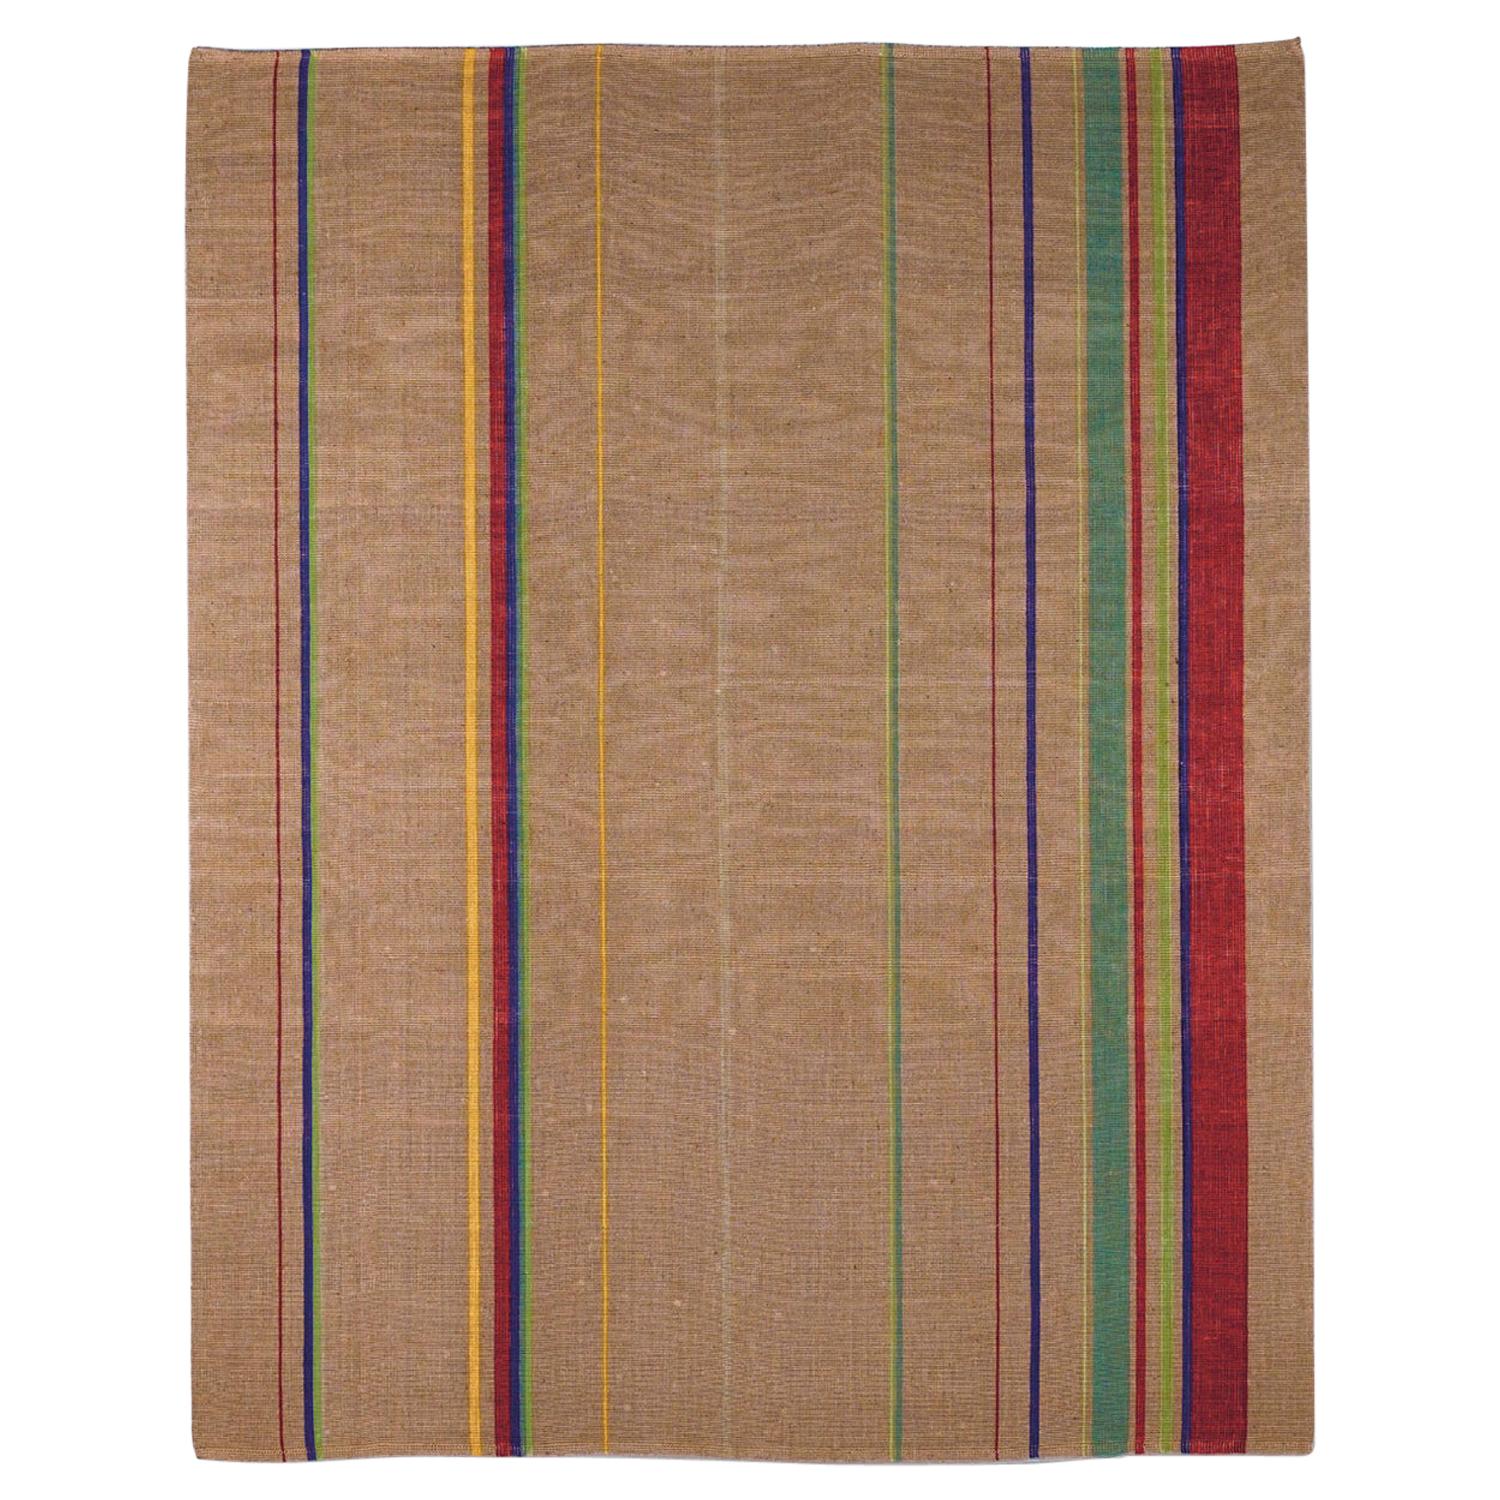 Nature Inspired Striped Spring Thin Rug by Deanna Comellini In Stock 200x250 cm For Sale